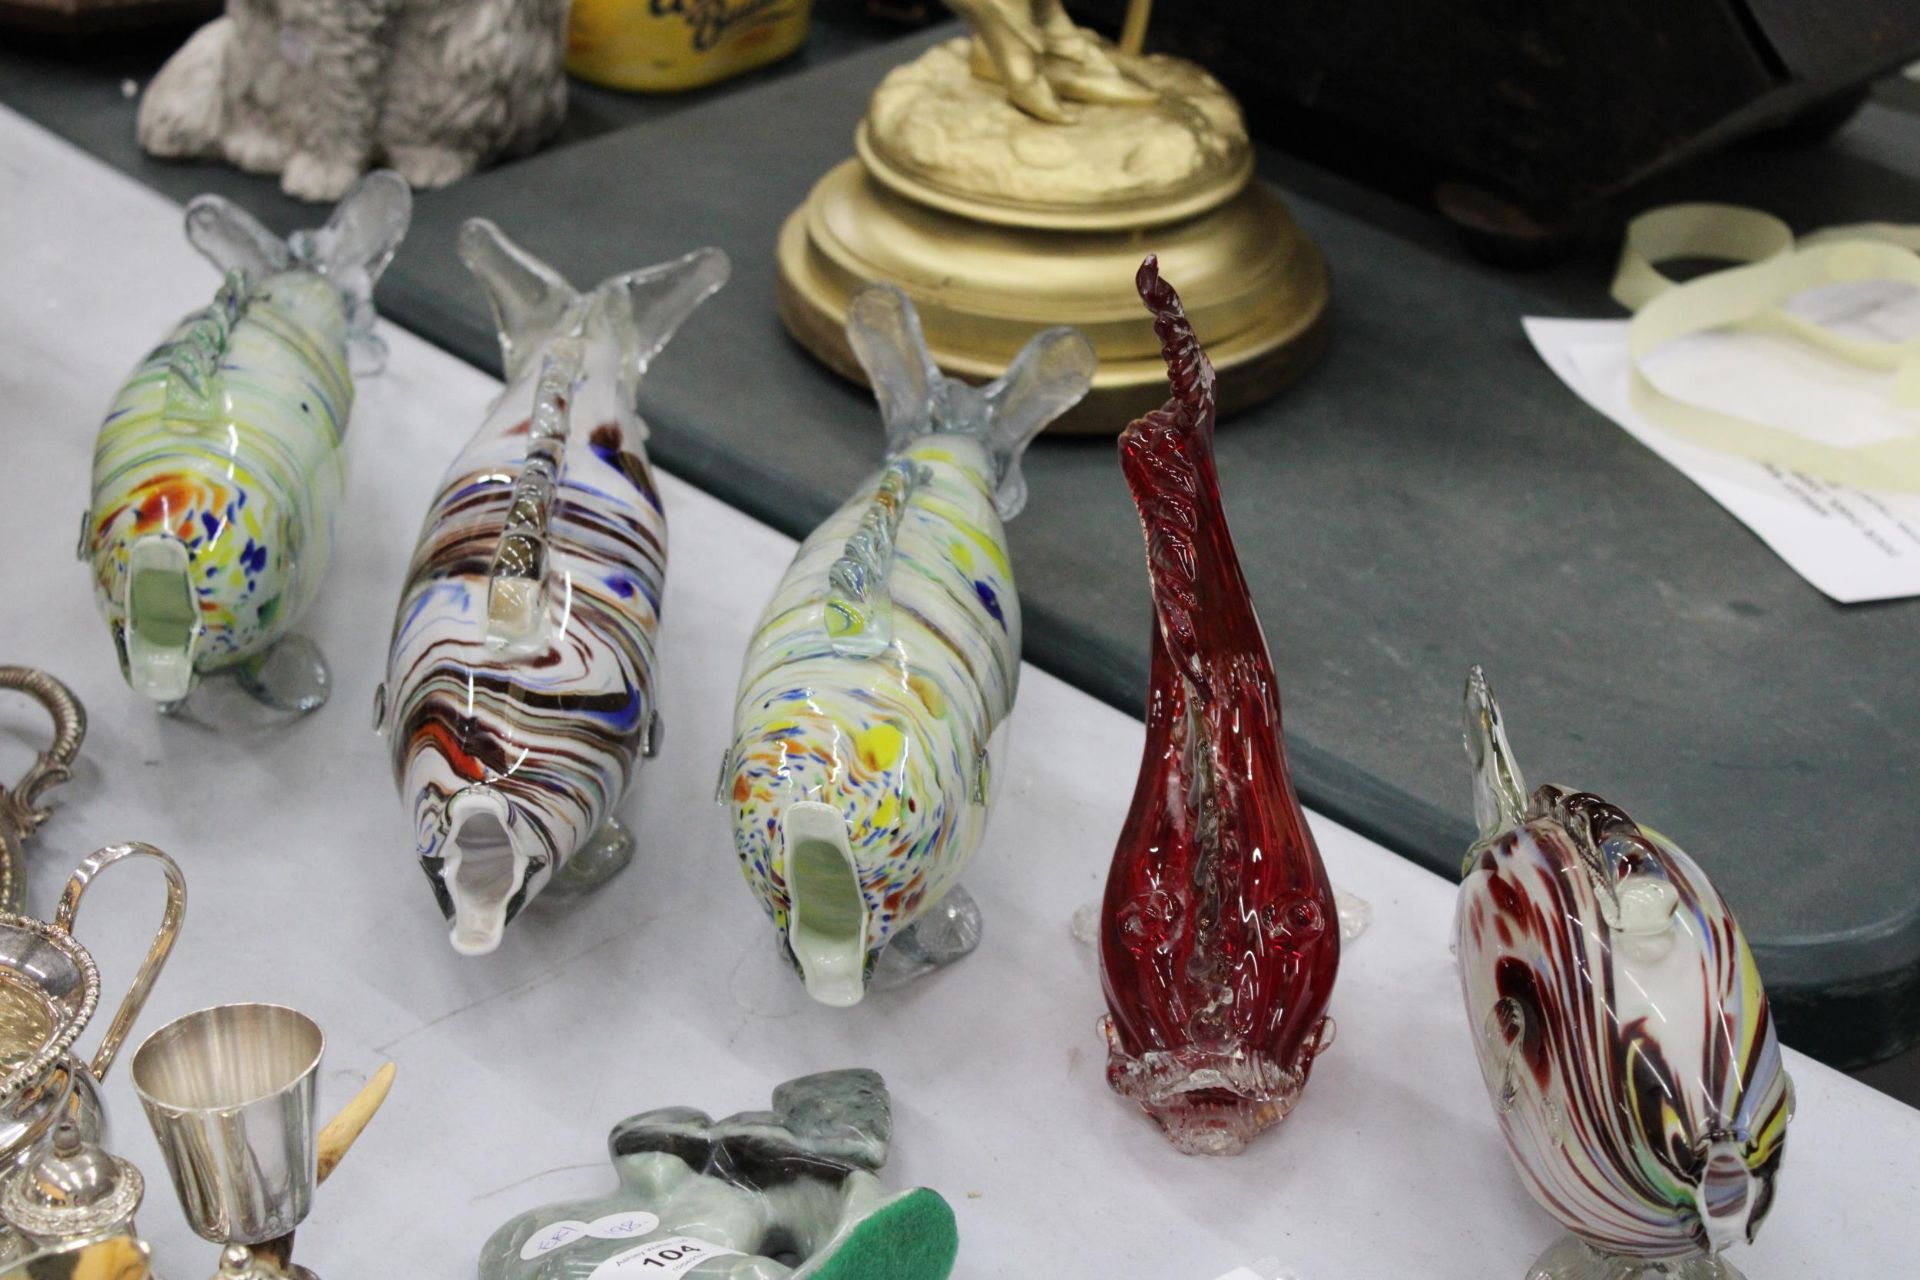 FIVE LARGE MURANO STYLE GLASS FISH - Image 3 of 5